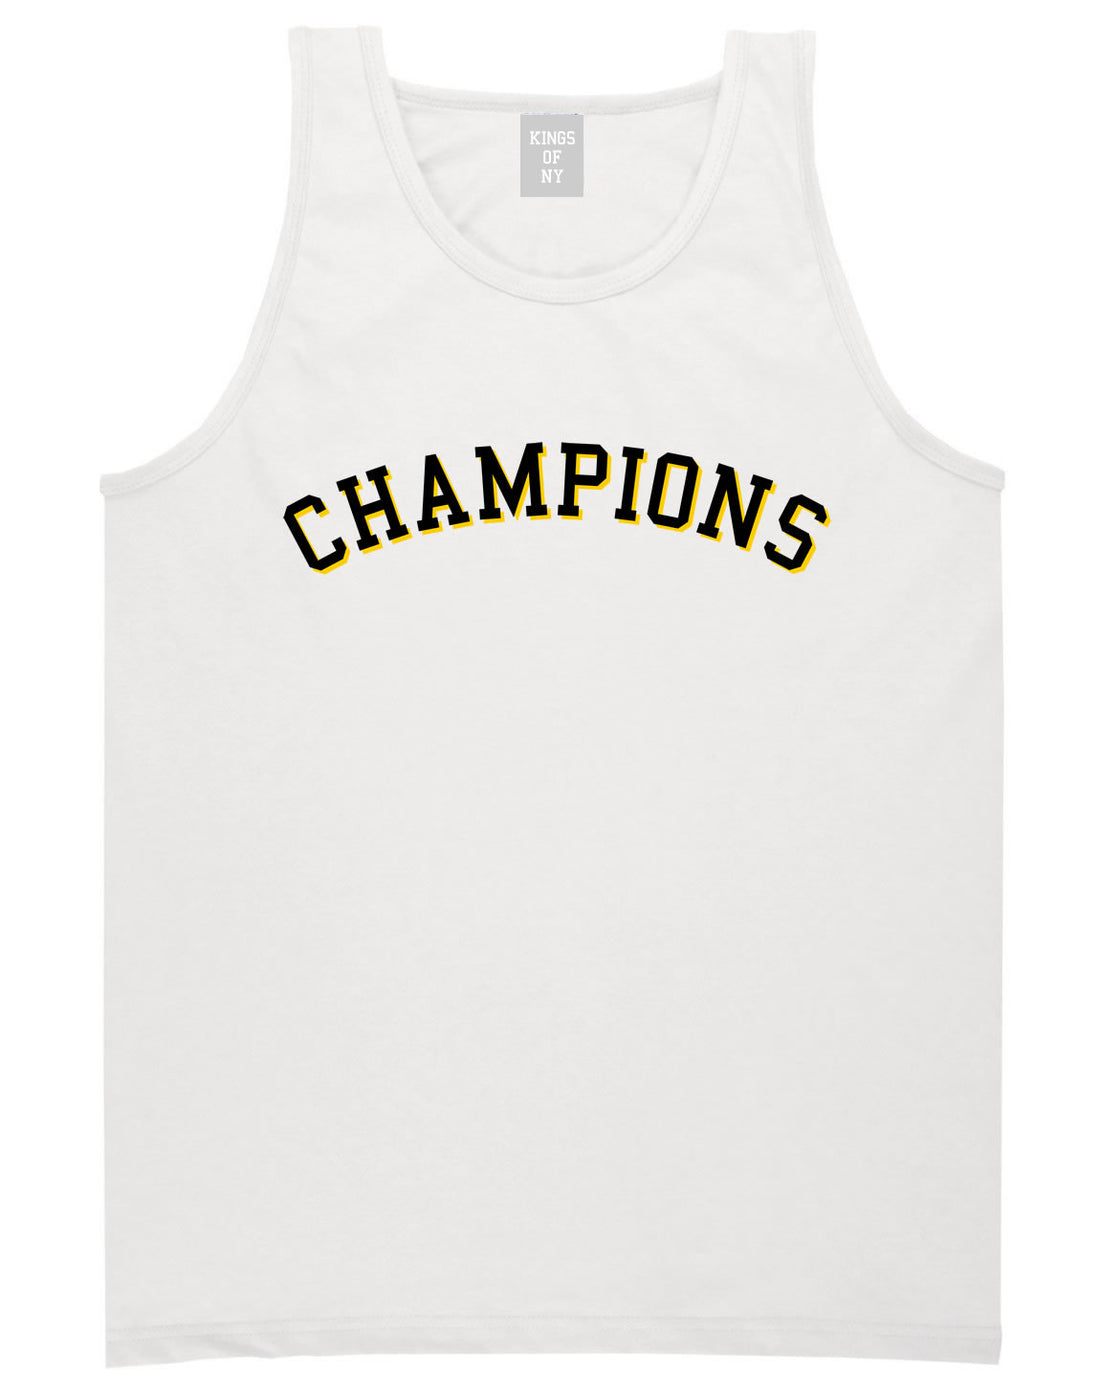 Champions Tank Top in White by Kings Of NY